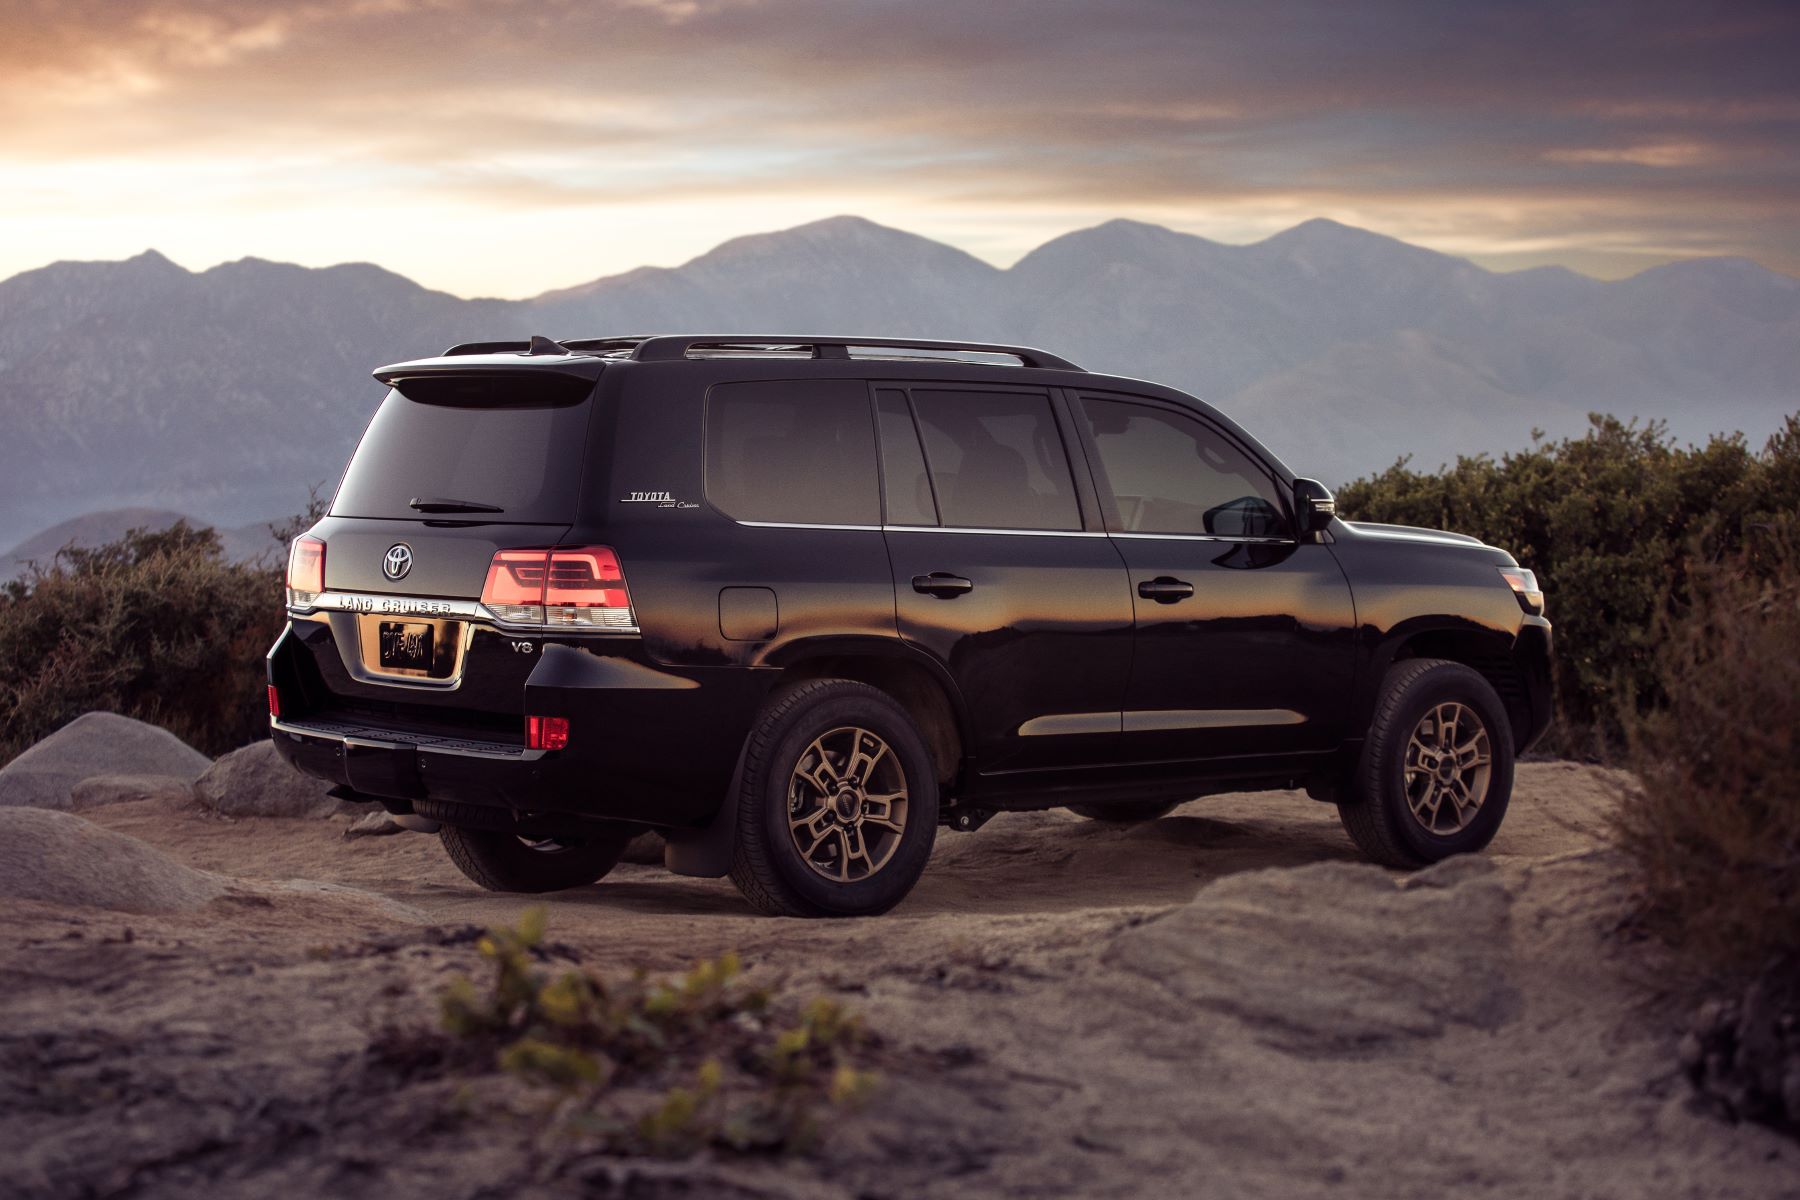 2021 Toyota Land Cruiser full-size off-road SUV model parked on top of a hill in a desert mountain range